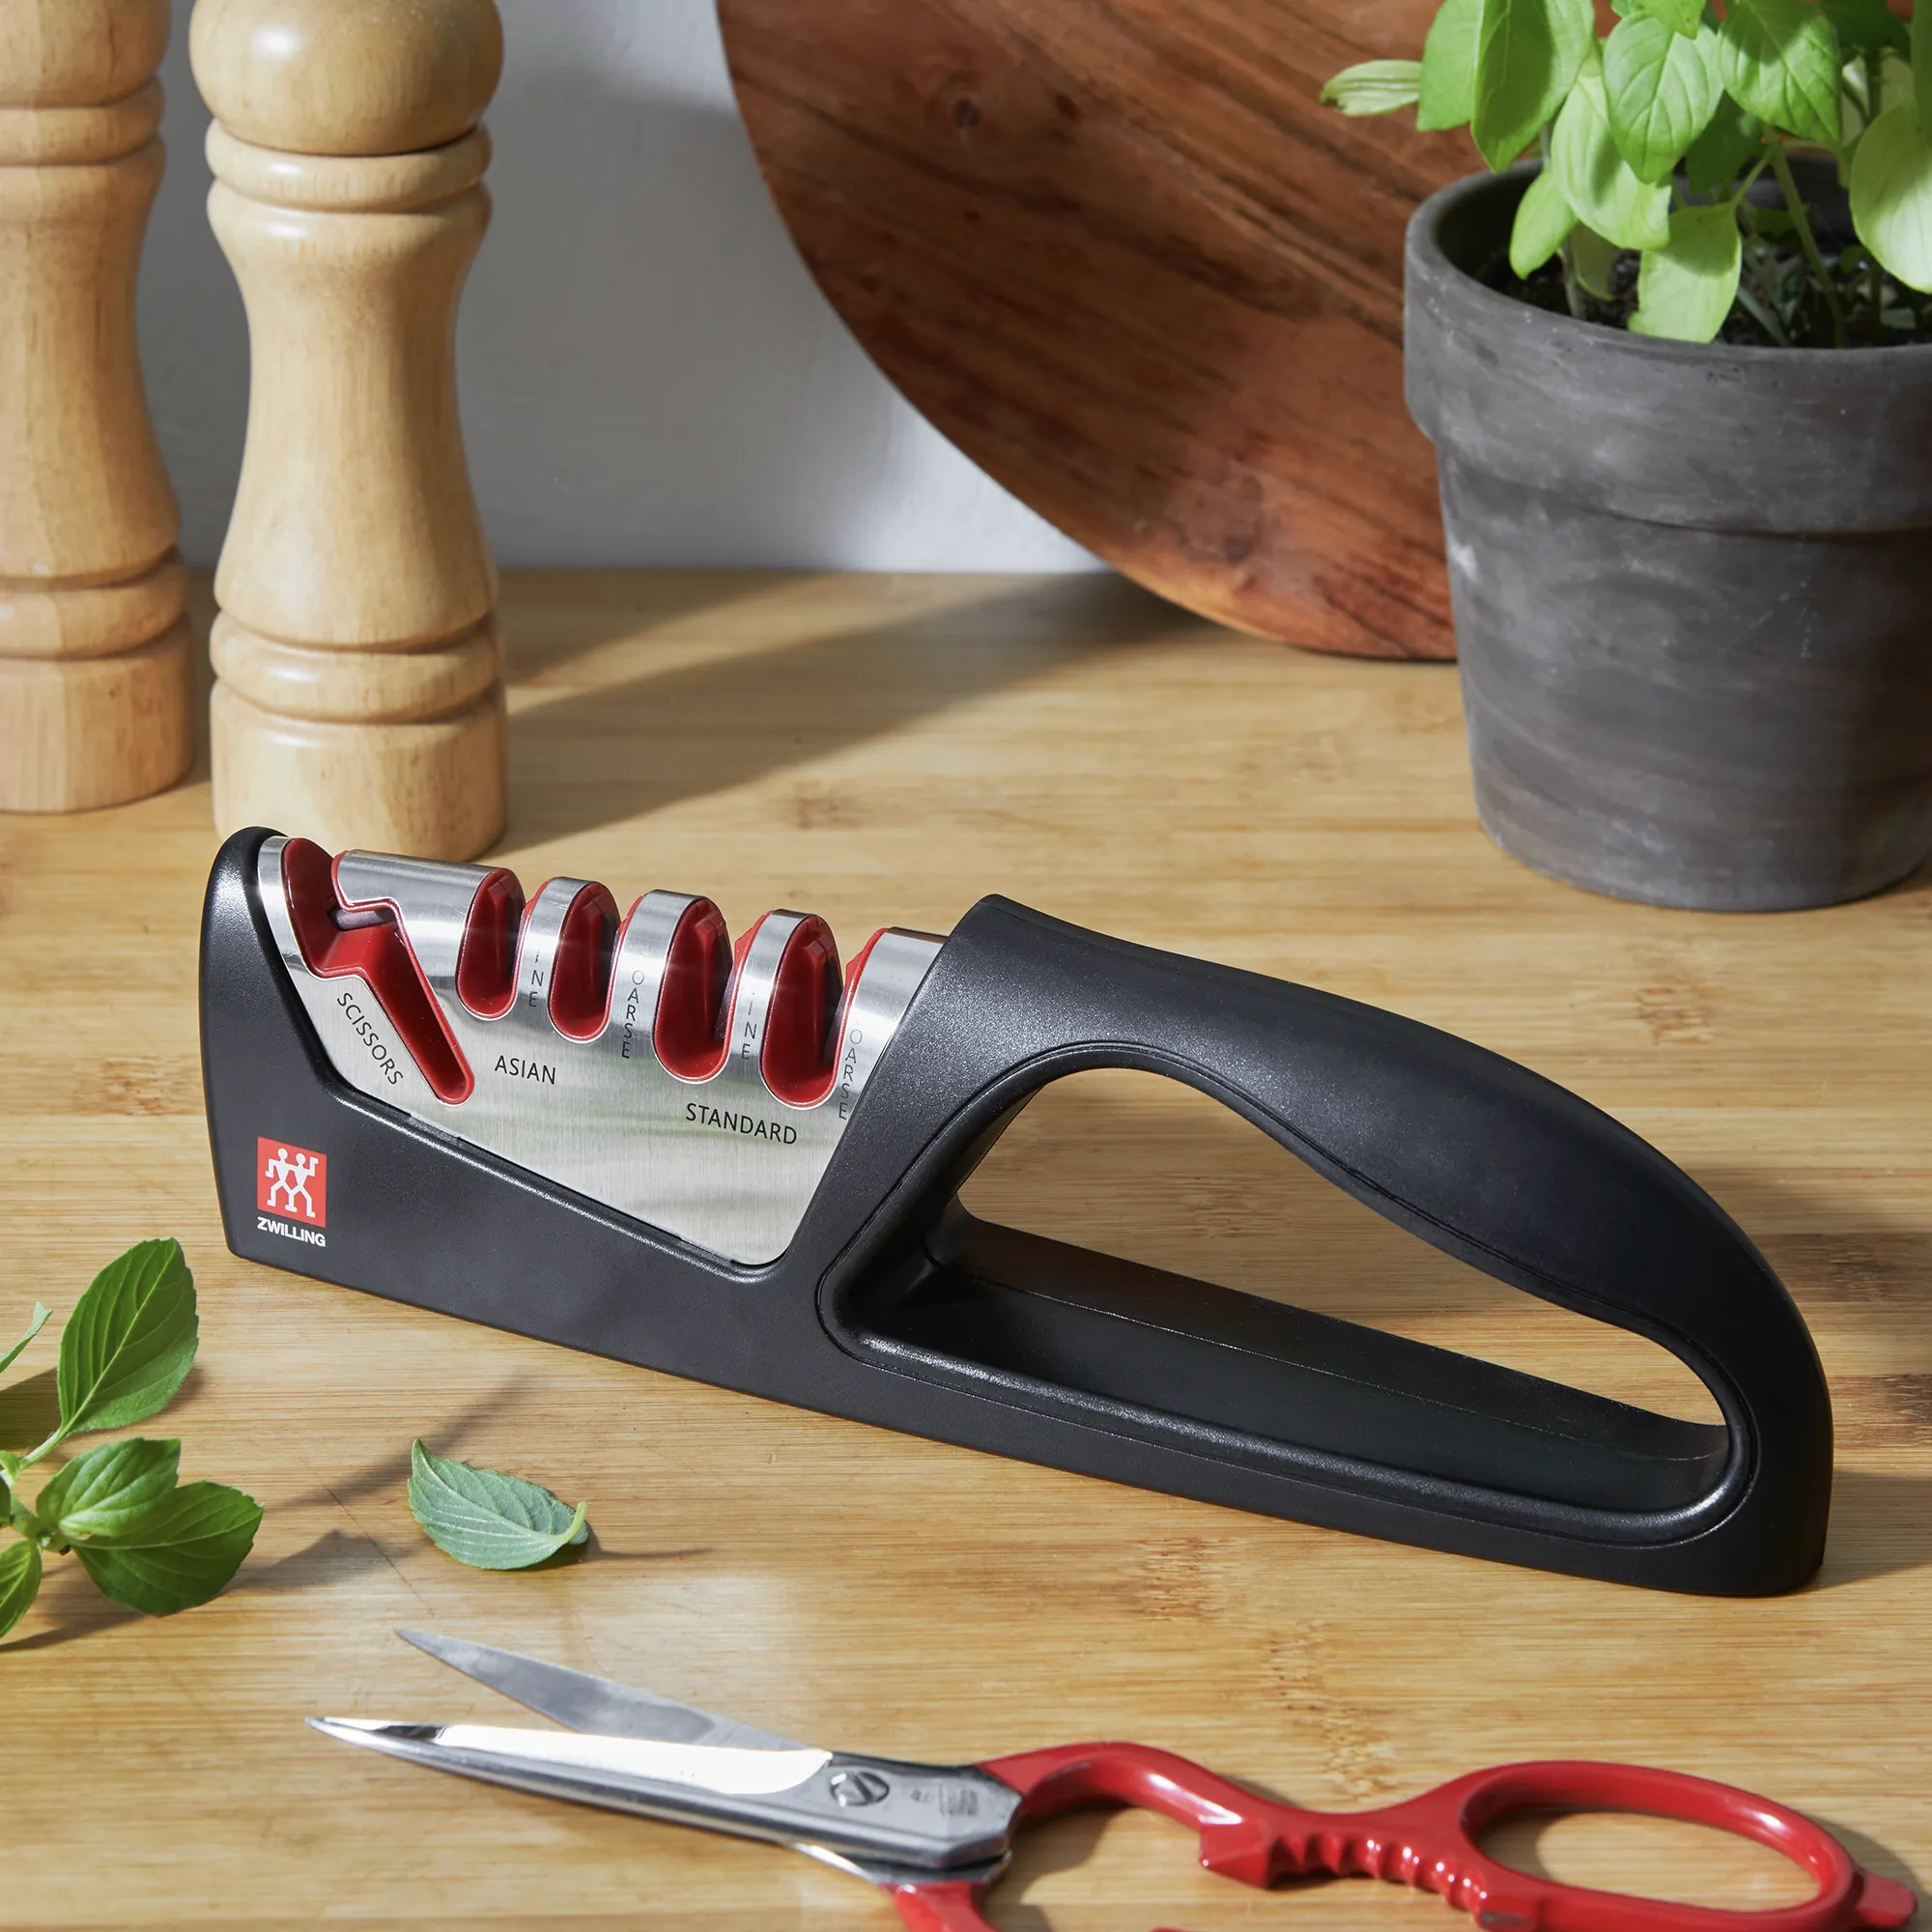 https://www.homethreads.com/files/zwilling/1010831-zwilling-razor-sharp-4-stage-pull-through-knife-sharpener-with-shear-sharpener-german-engineered-informed-by-100-years-of-mastery-3.webp